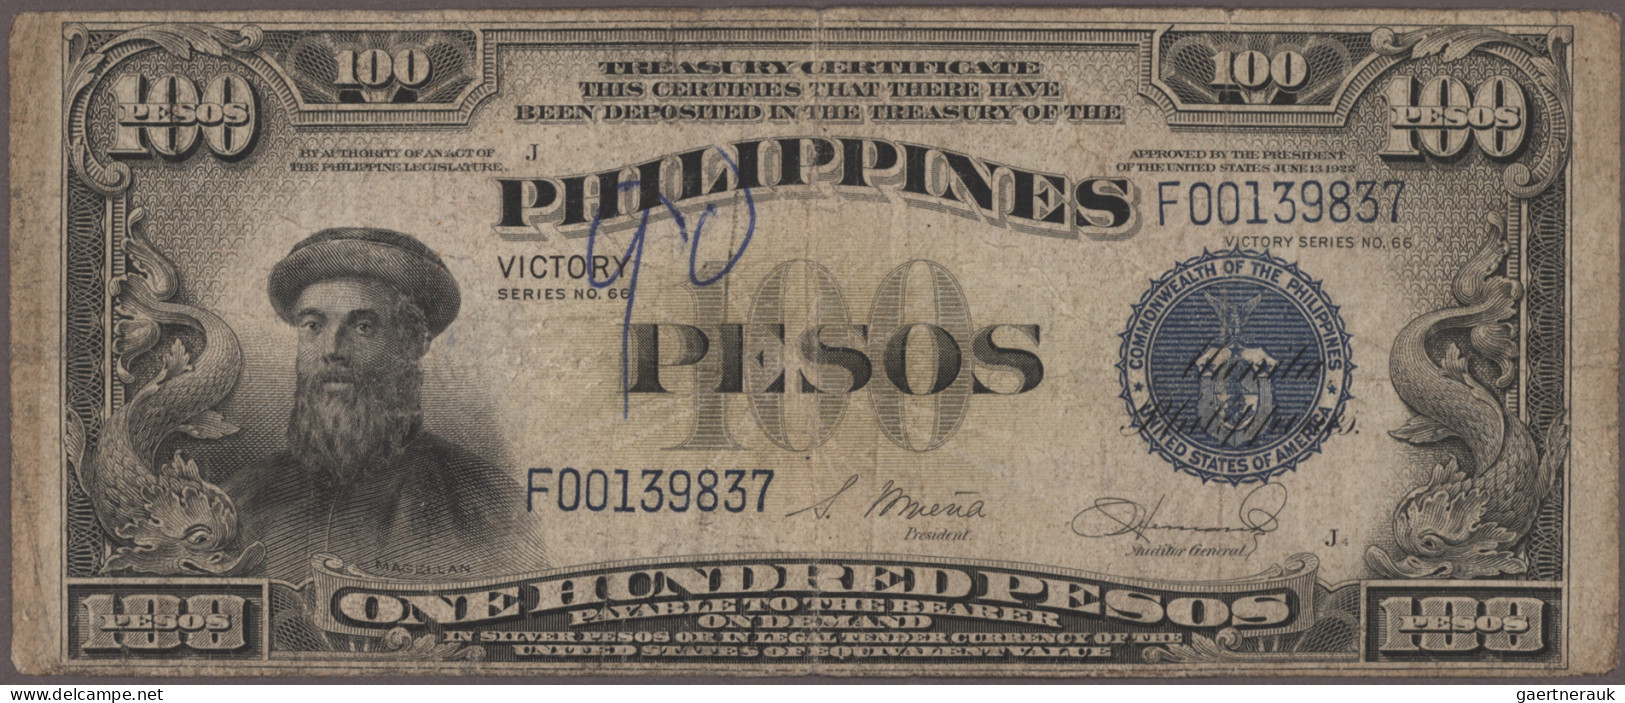 Philippines: Bank Of The Philippine Islands And Central Bank Of The Philippines, - Philippinen